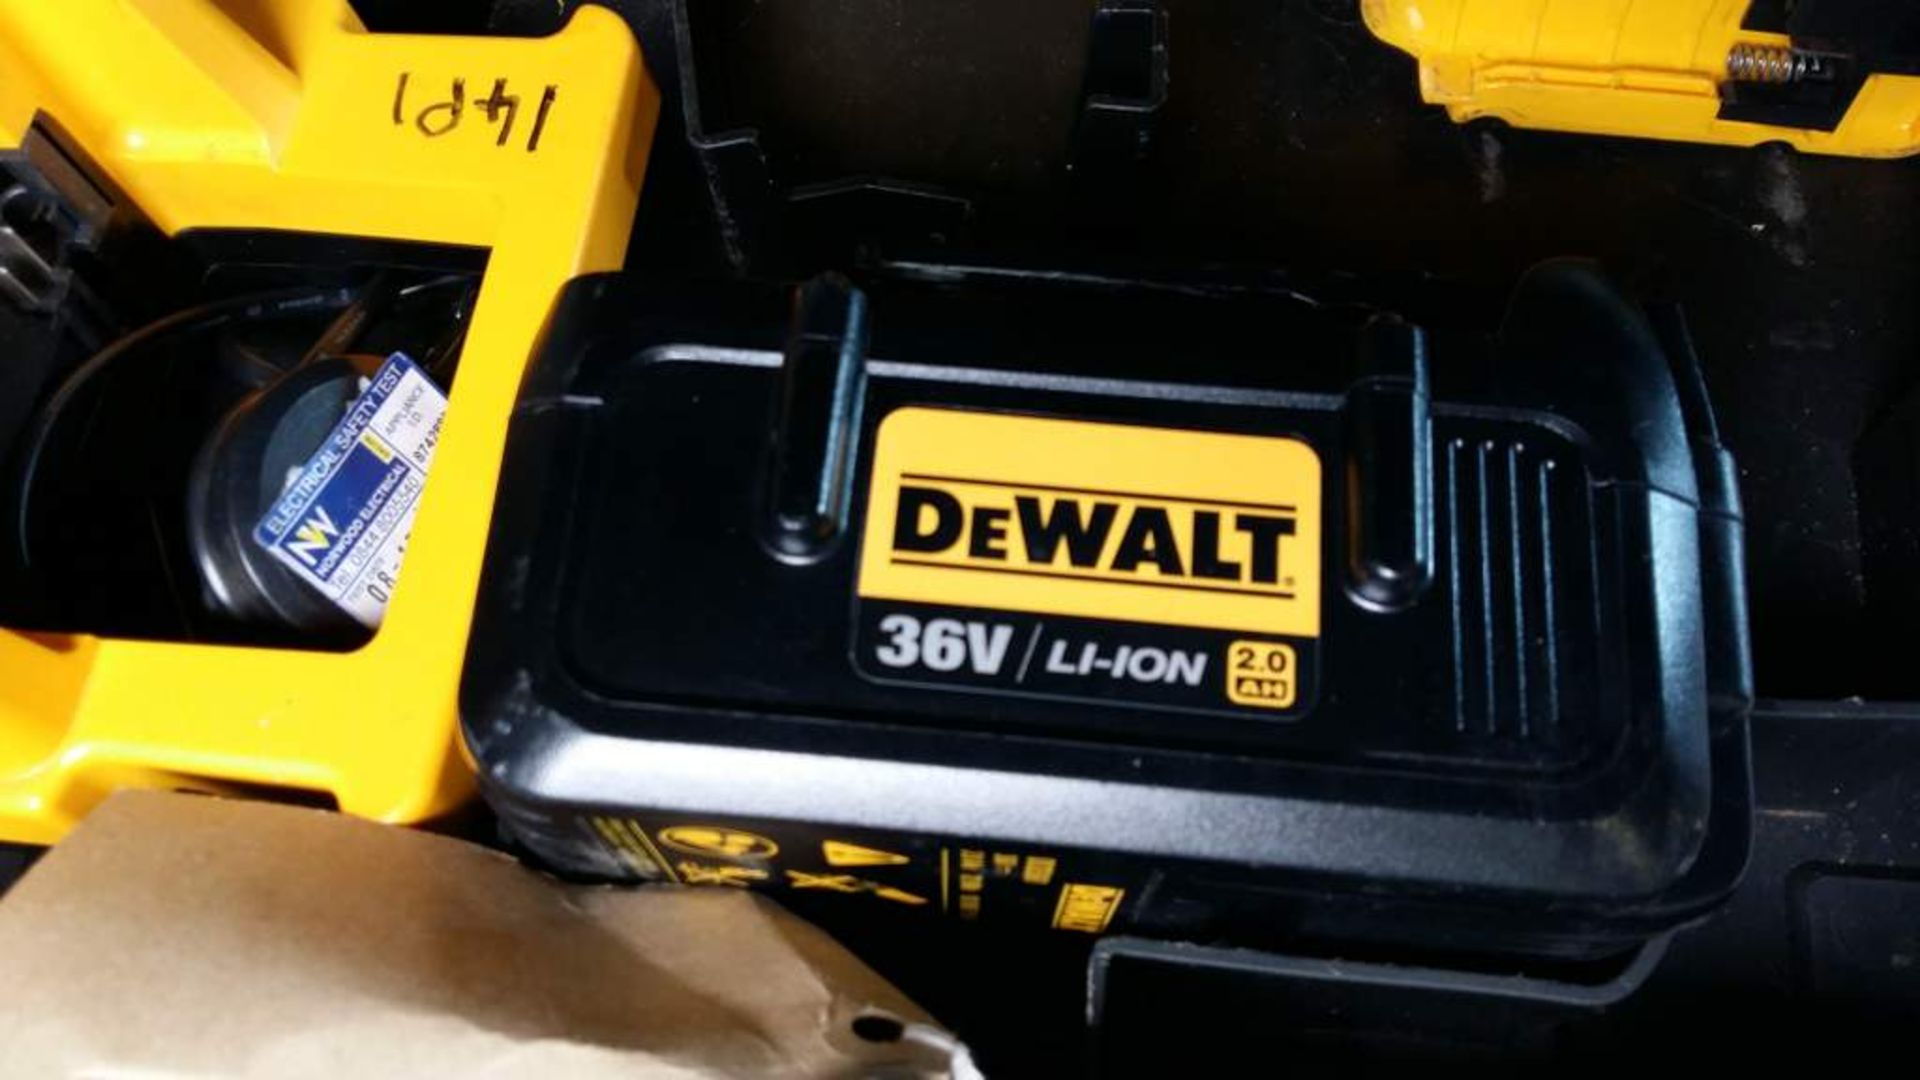 Dewalt DC315 Reciprocating Saw with battery and charger - Image 3 of 4